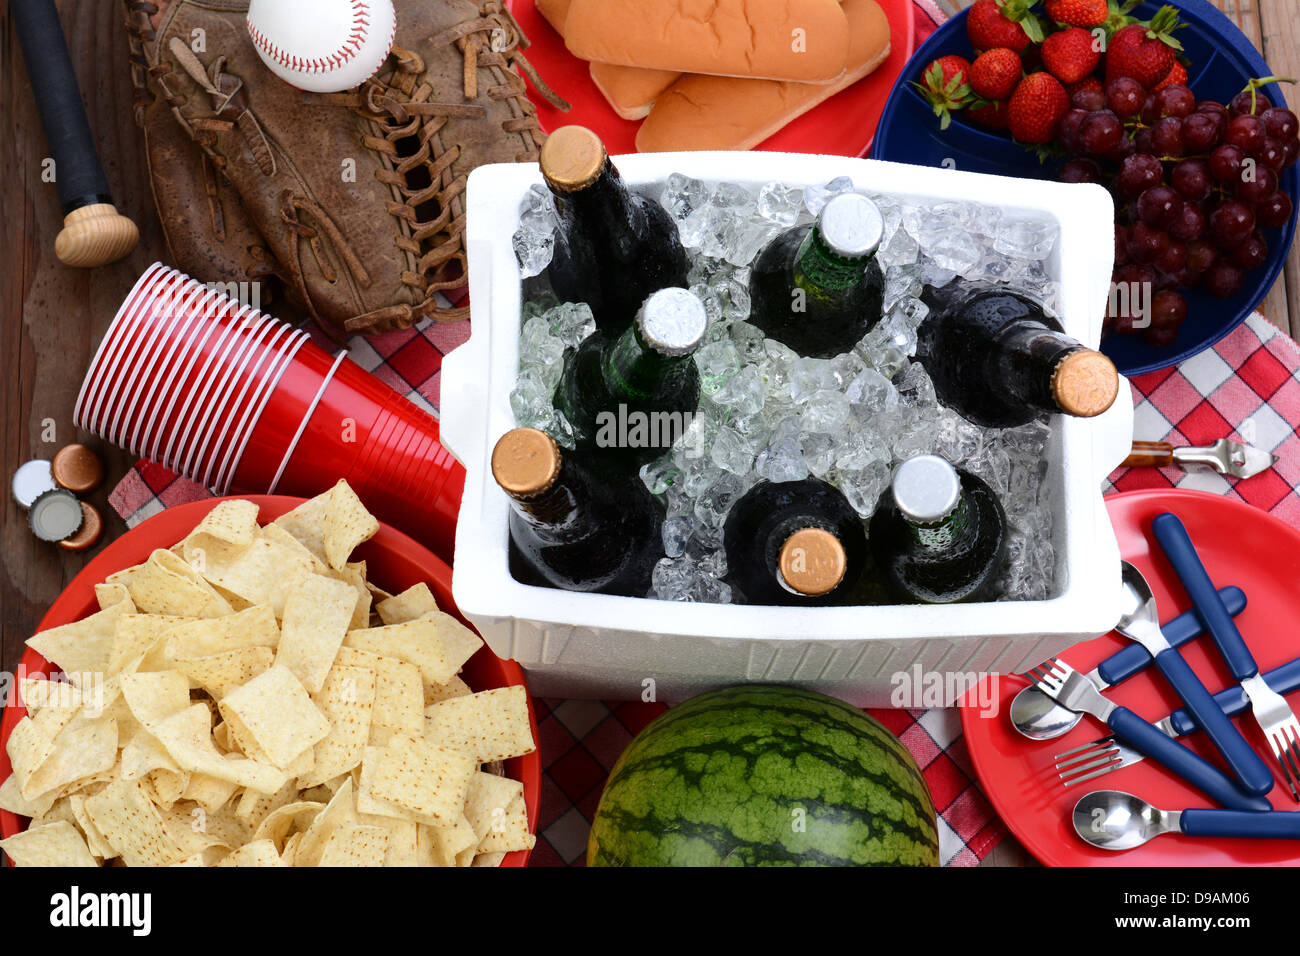 Overhead view of a picnic table, with ice chest full of beer, bowl of chips, watermelon, strawberries, grapes, corn chips. Stock Photo